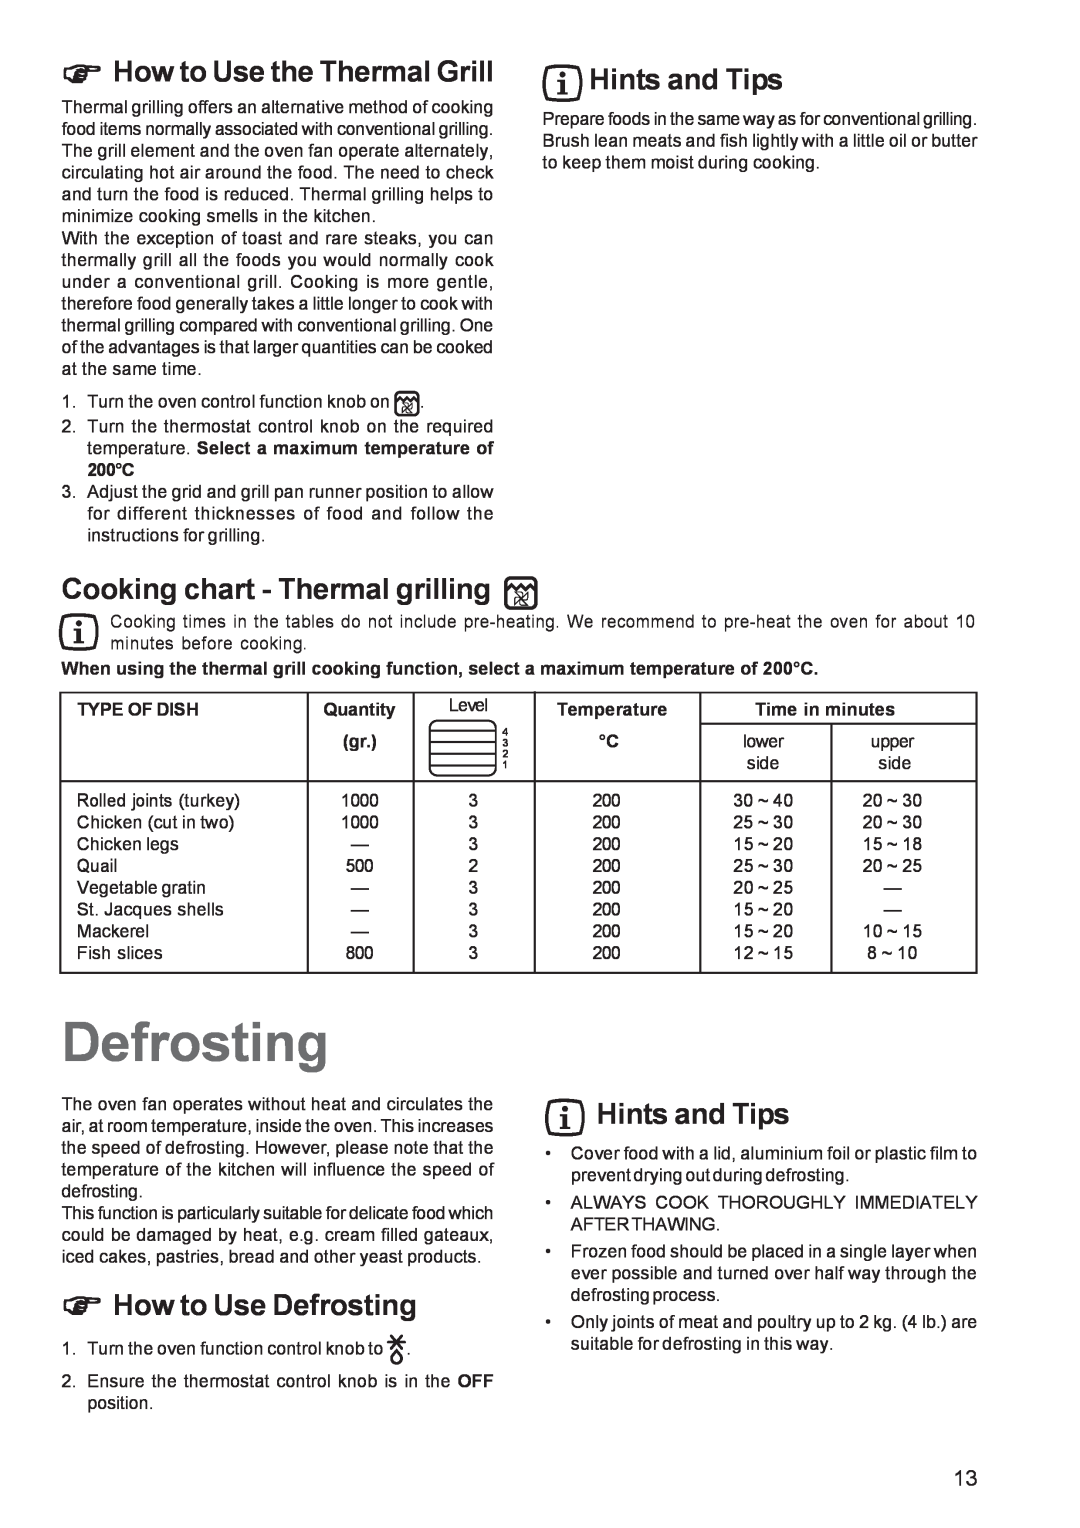 Zanussi ZBF 560 How to Use the Thermal Grill, Cooking chart - Thermal grilling, How to Use Defrosting, Hints and Tips 